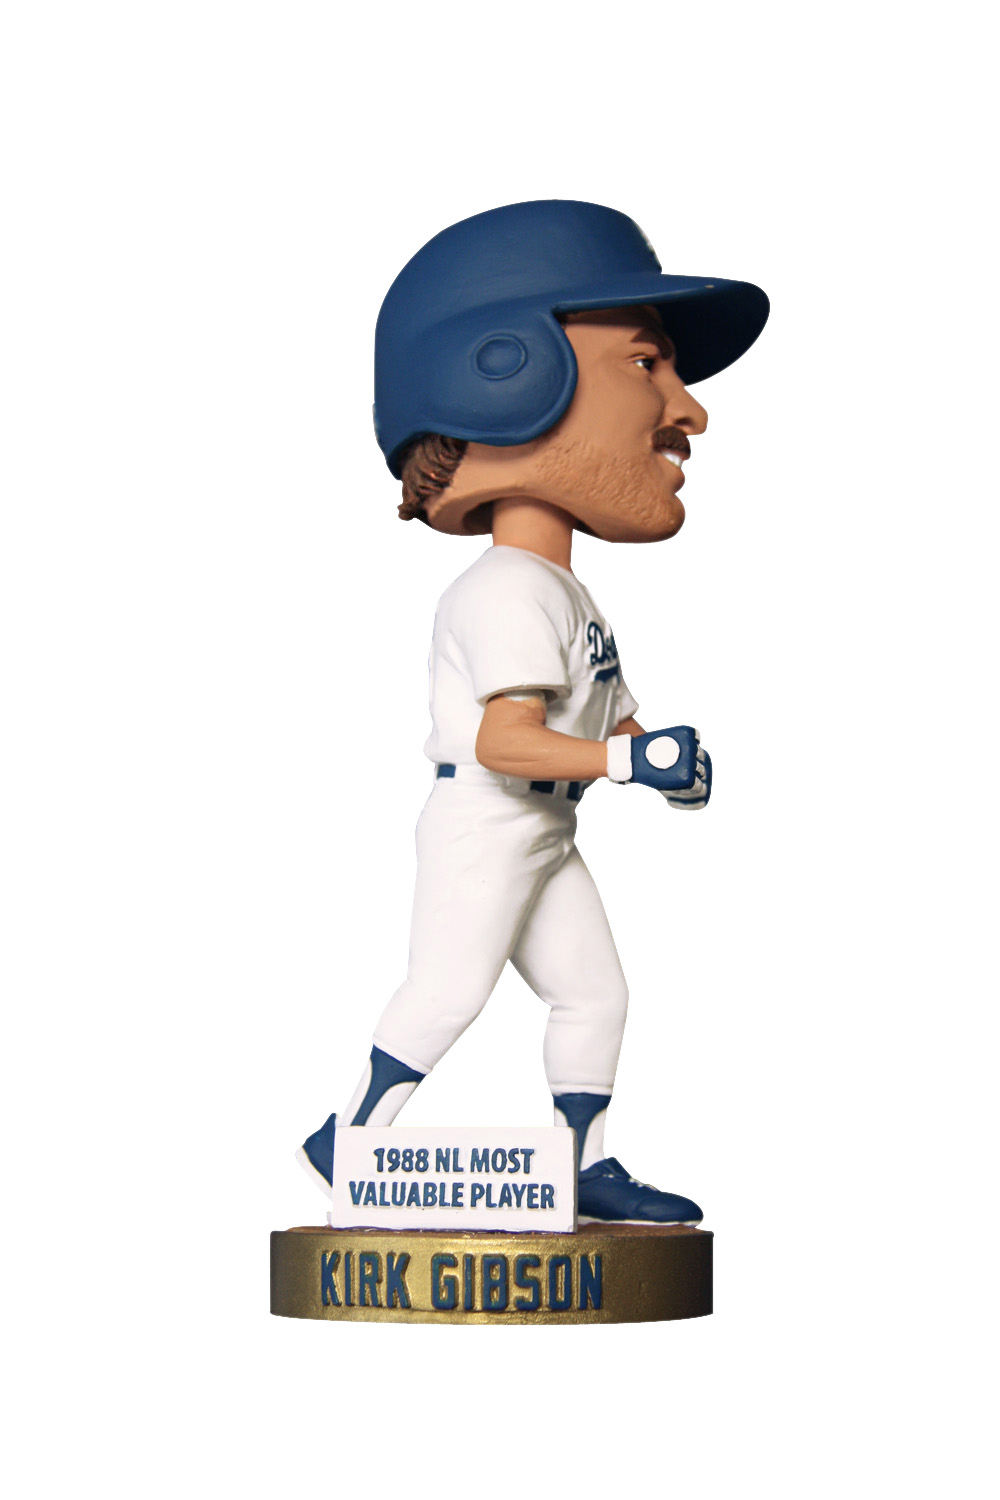 Is This the Greatest Bobblehead of All-Time?